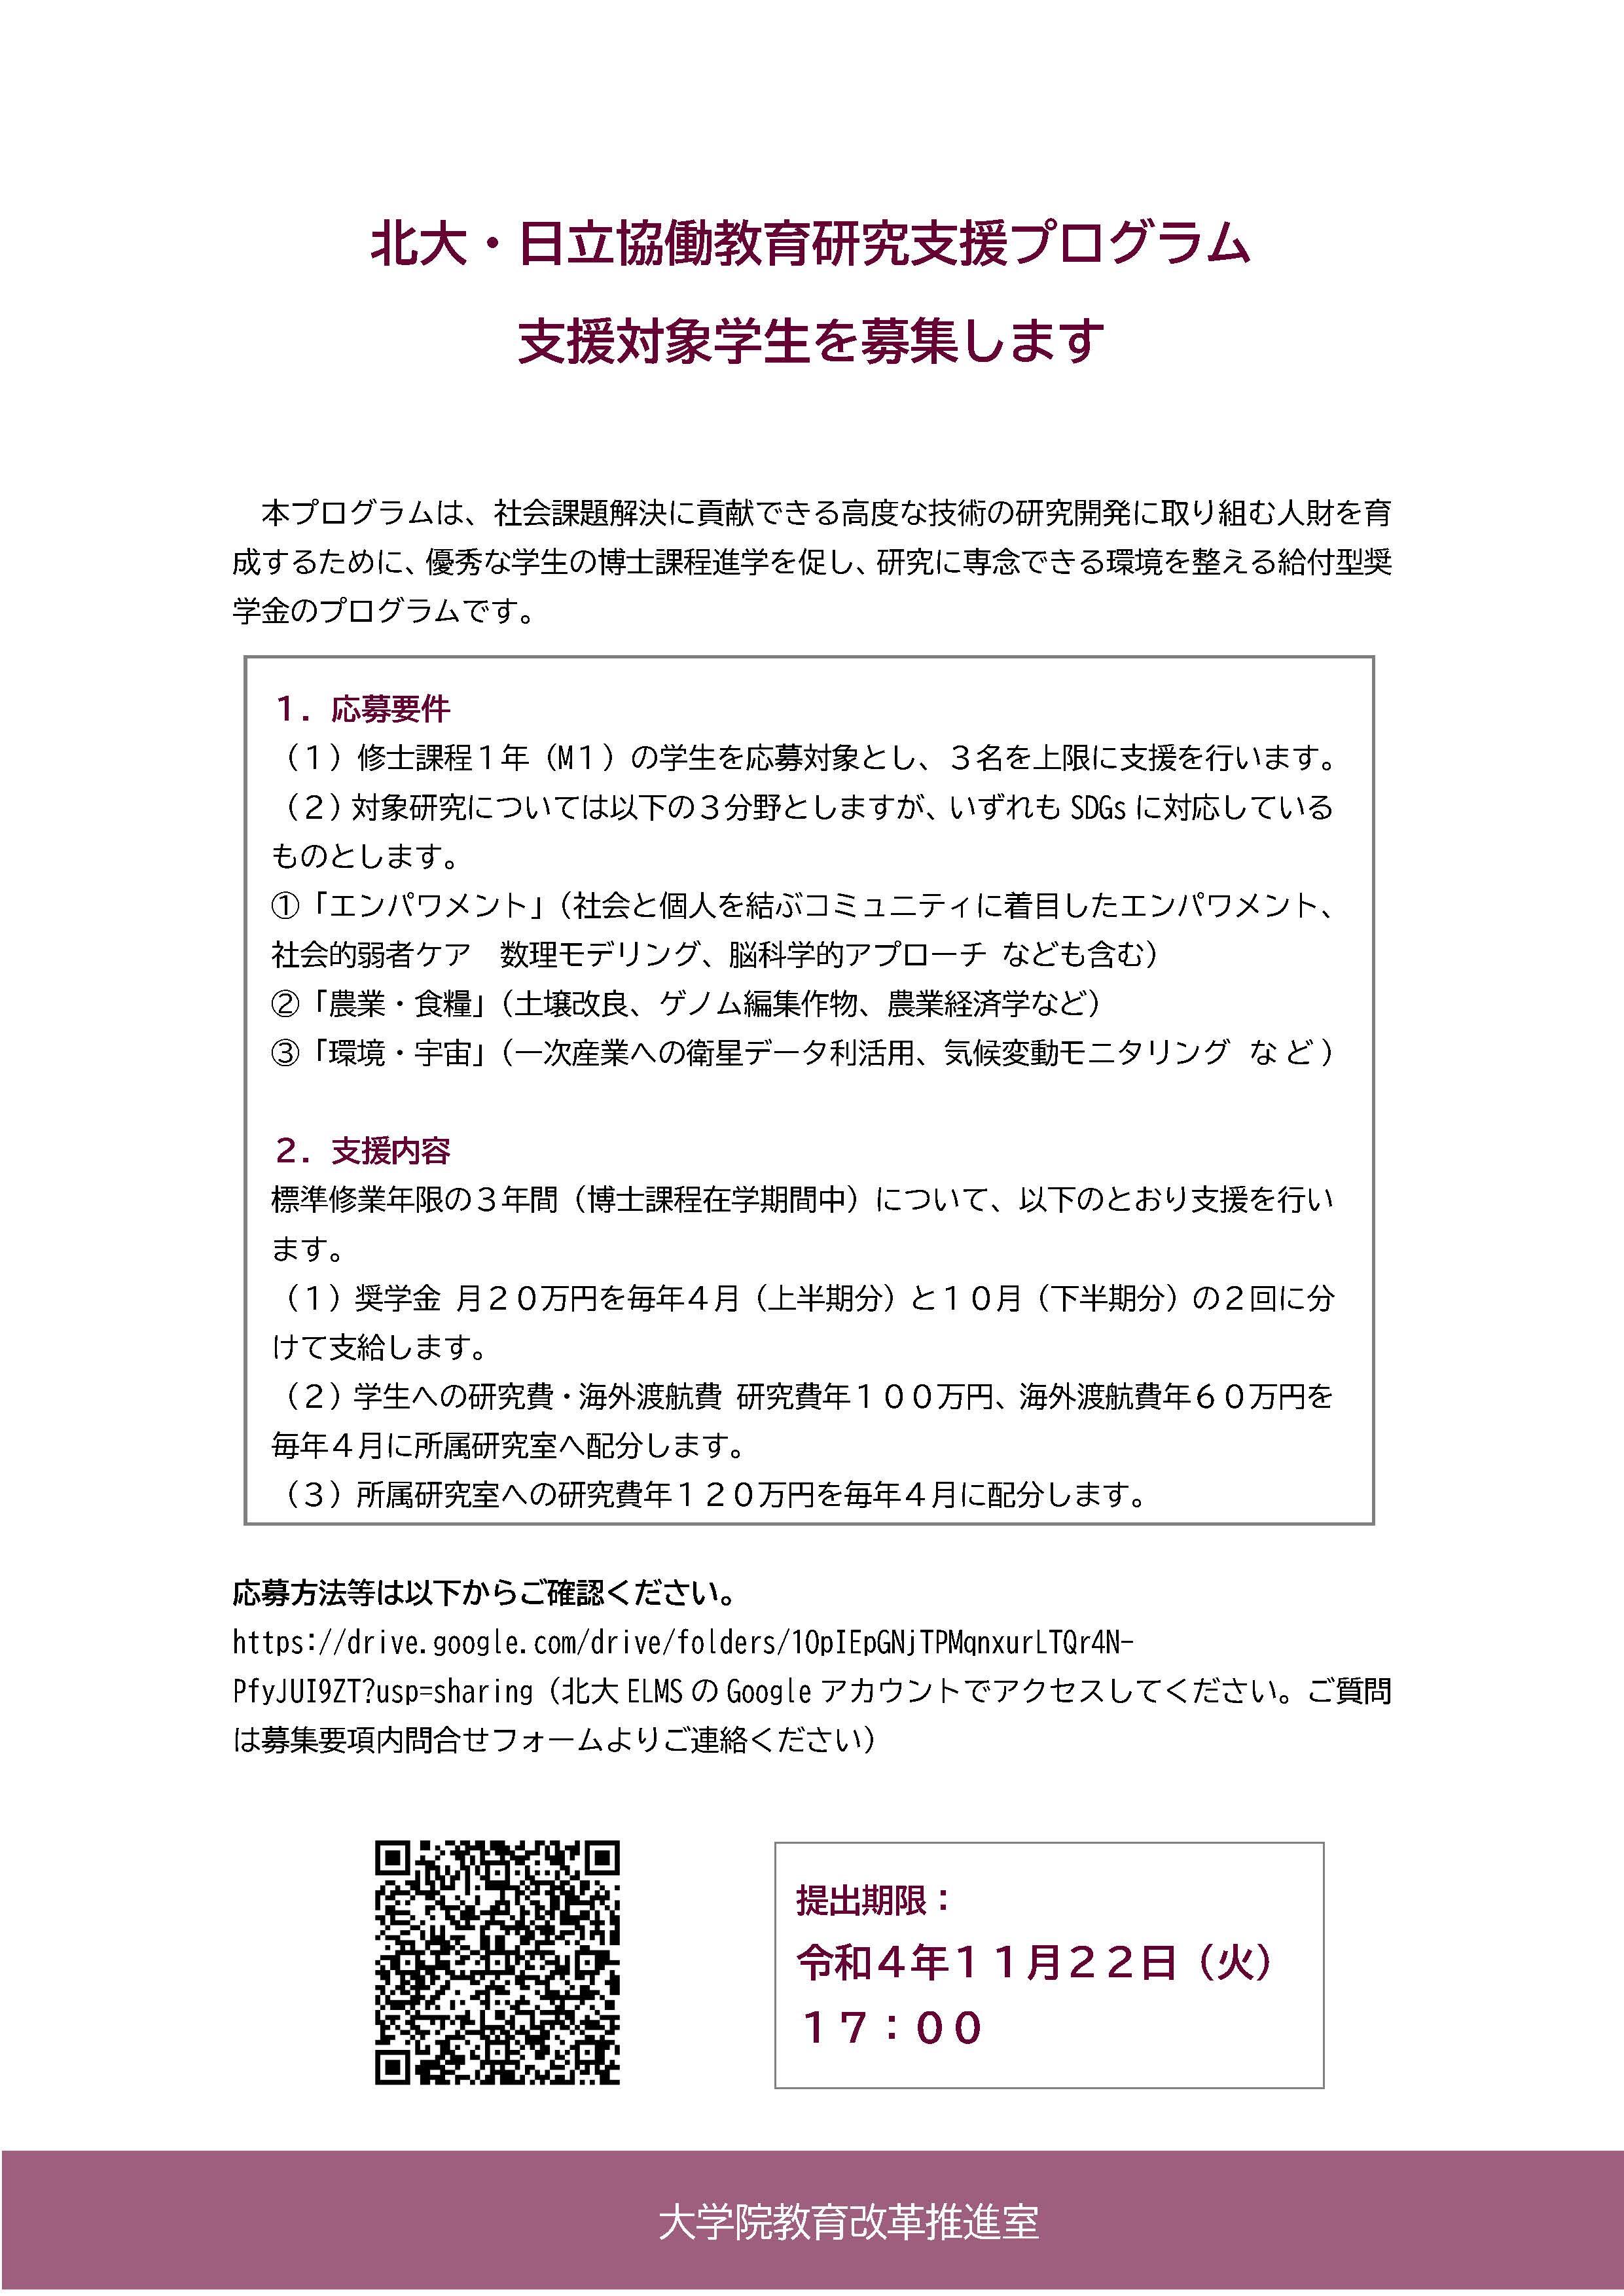 Hokkaido University-Hitachi Joint Cooperative Support Program for Education and Research poster J.jpg